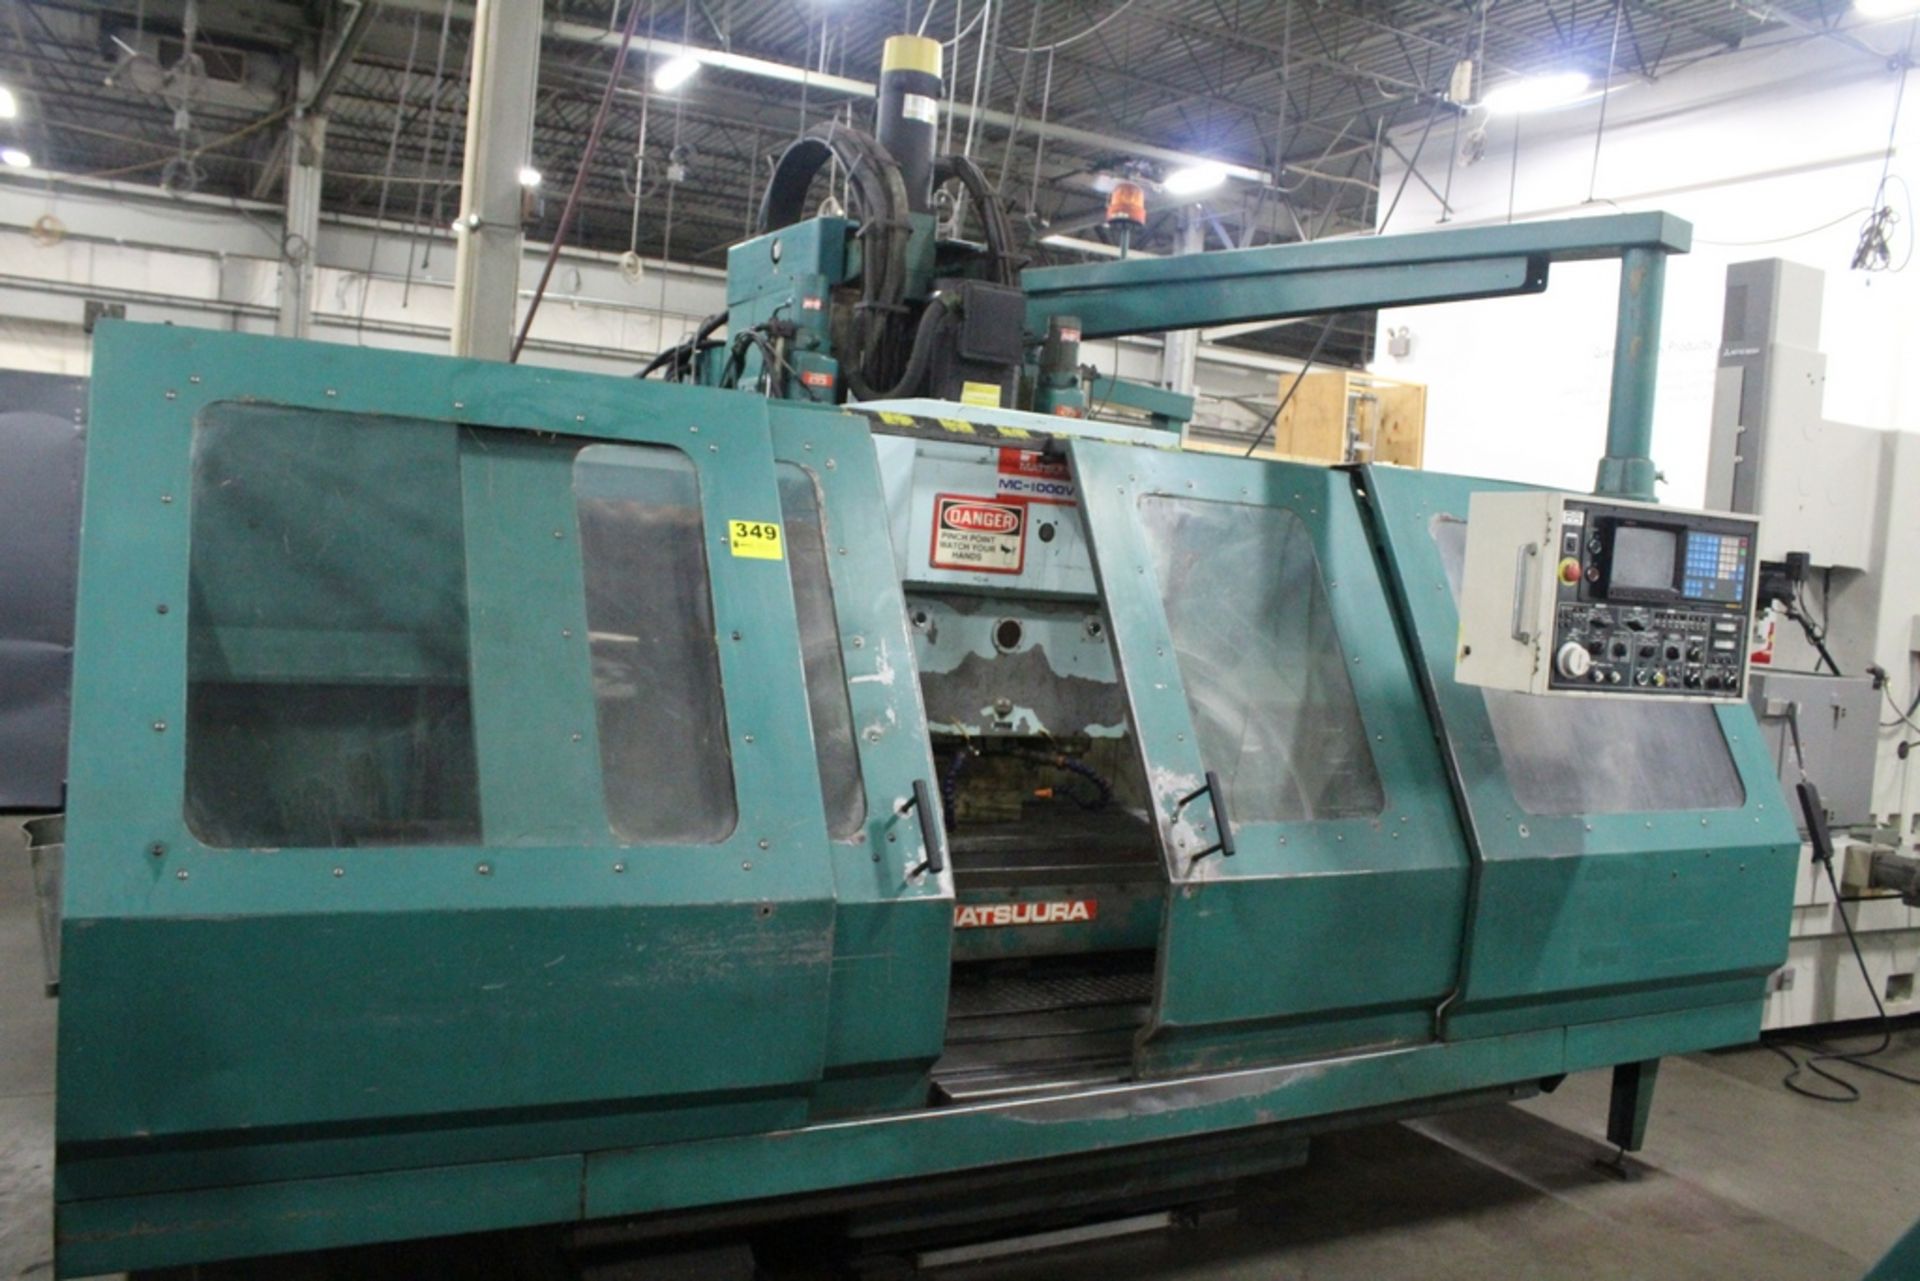 MATSUURA MODEL MC-1000V-DC TWIN SPINDLE VERTICAL MACHINING CENTER, 25-ATC, 4-AXIS, S/N NA; WITH